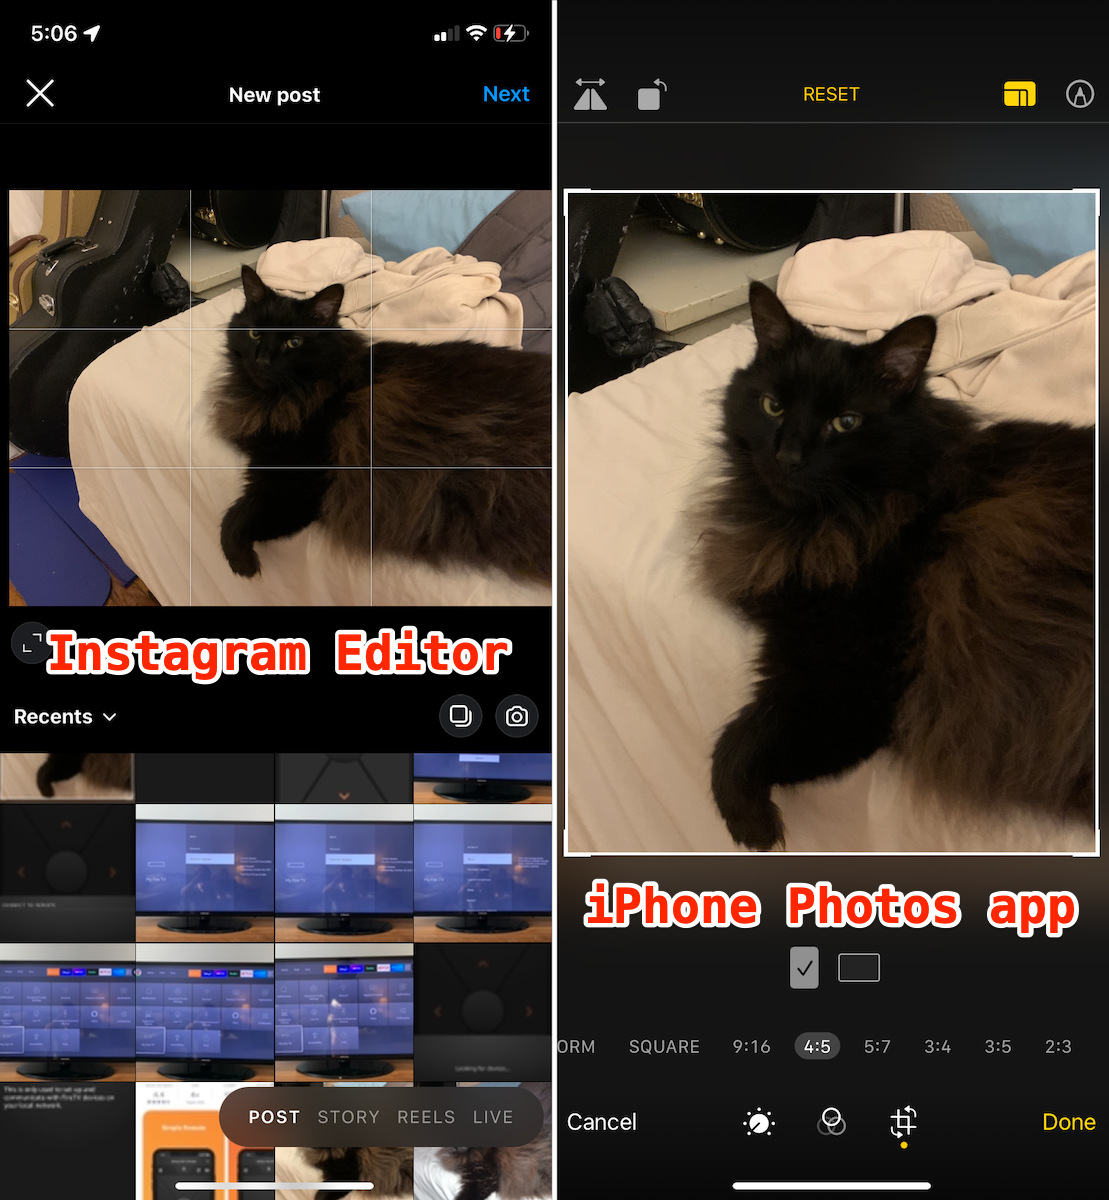 Showing how to edit a photo in both Instagram and the iPhone's Photos app.